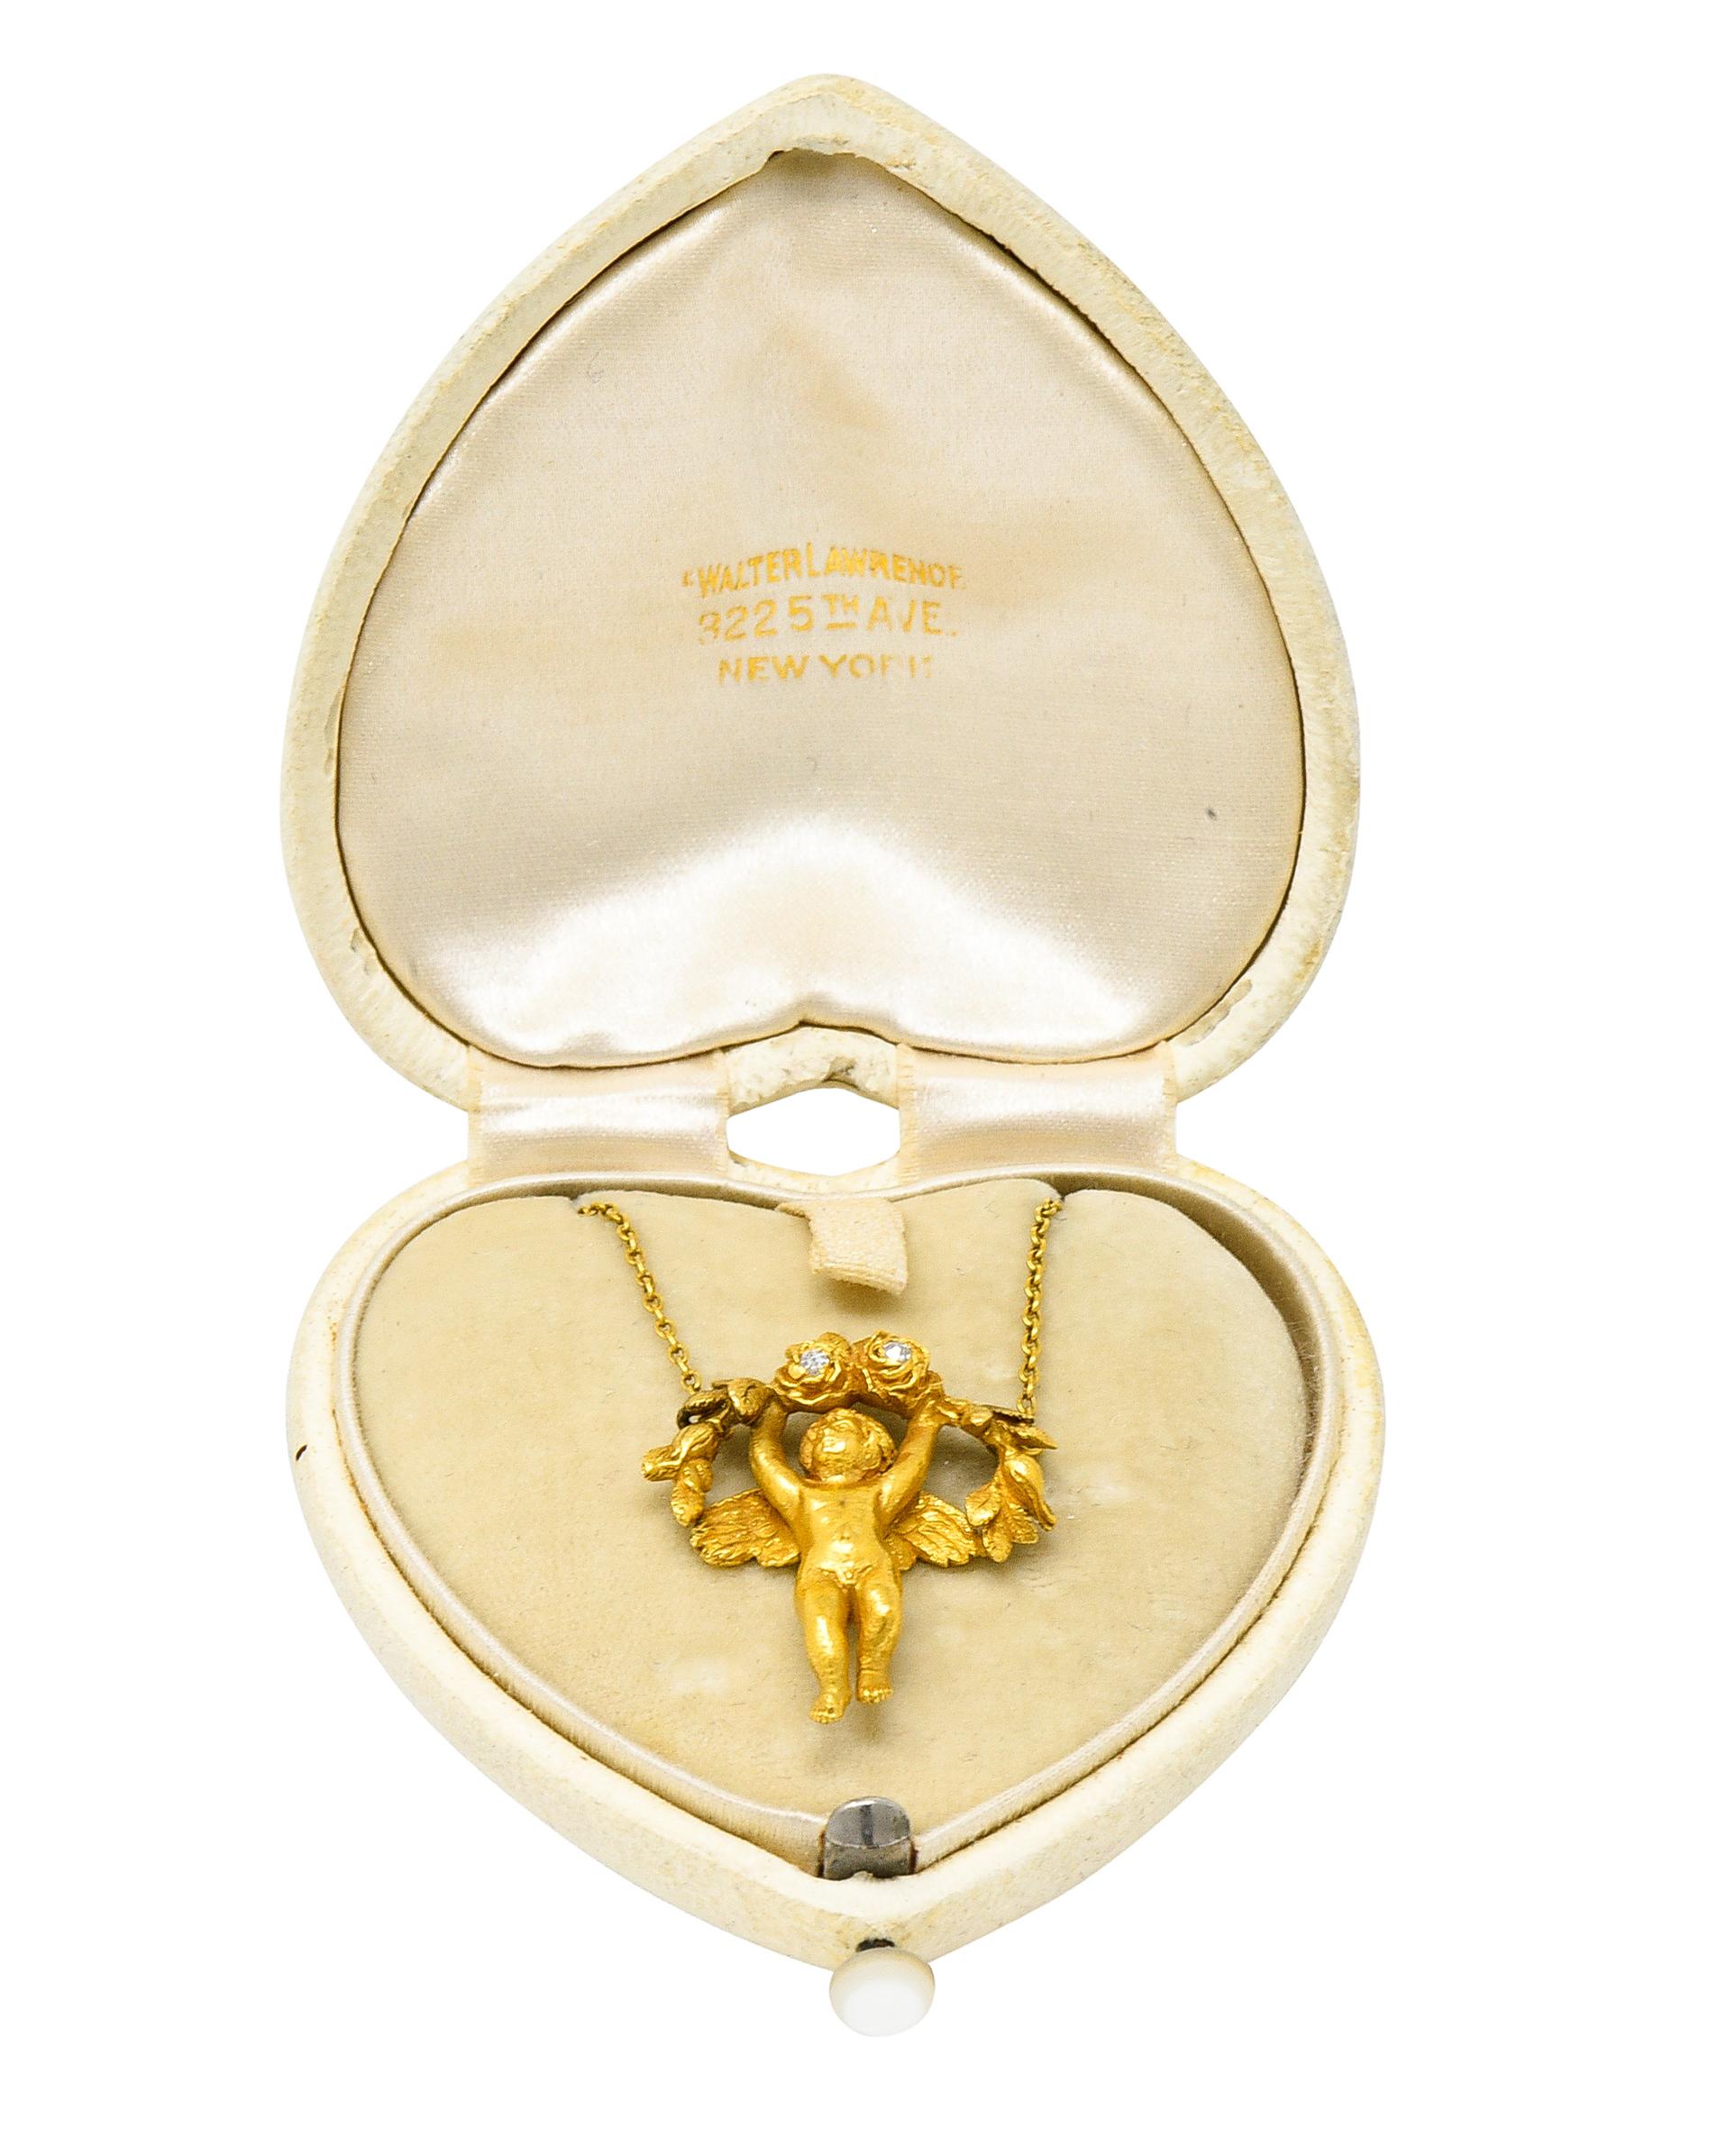 Cable chain necklace centers a highly rendered cherubic station

Matte gold with spread wings and upholding a bushel of roses

Accented by old European cut diamonds weighing approximately 0.05 carat

Eye clean and bright - quality consistent with